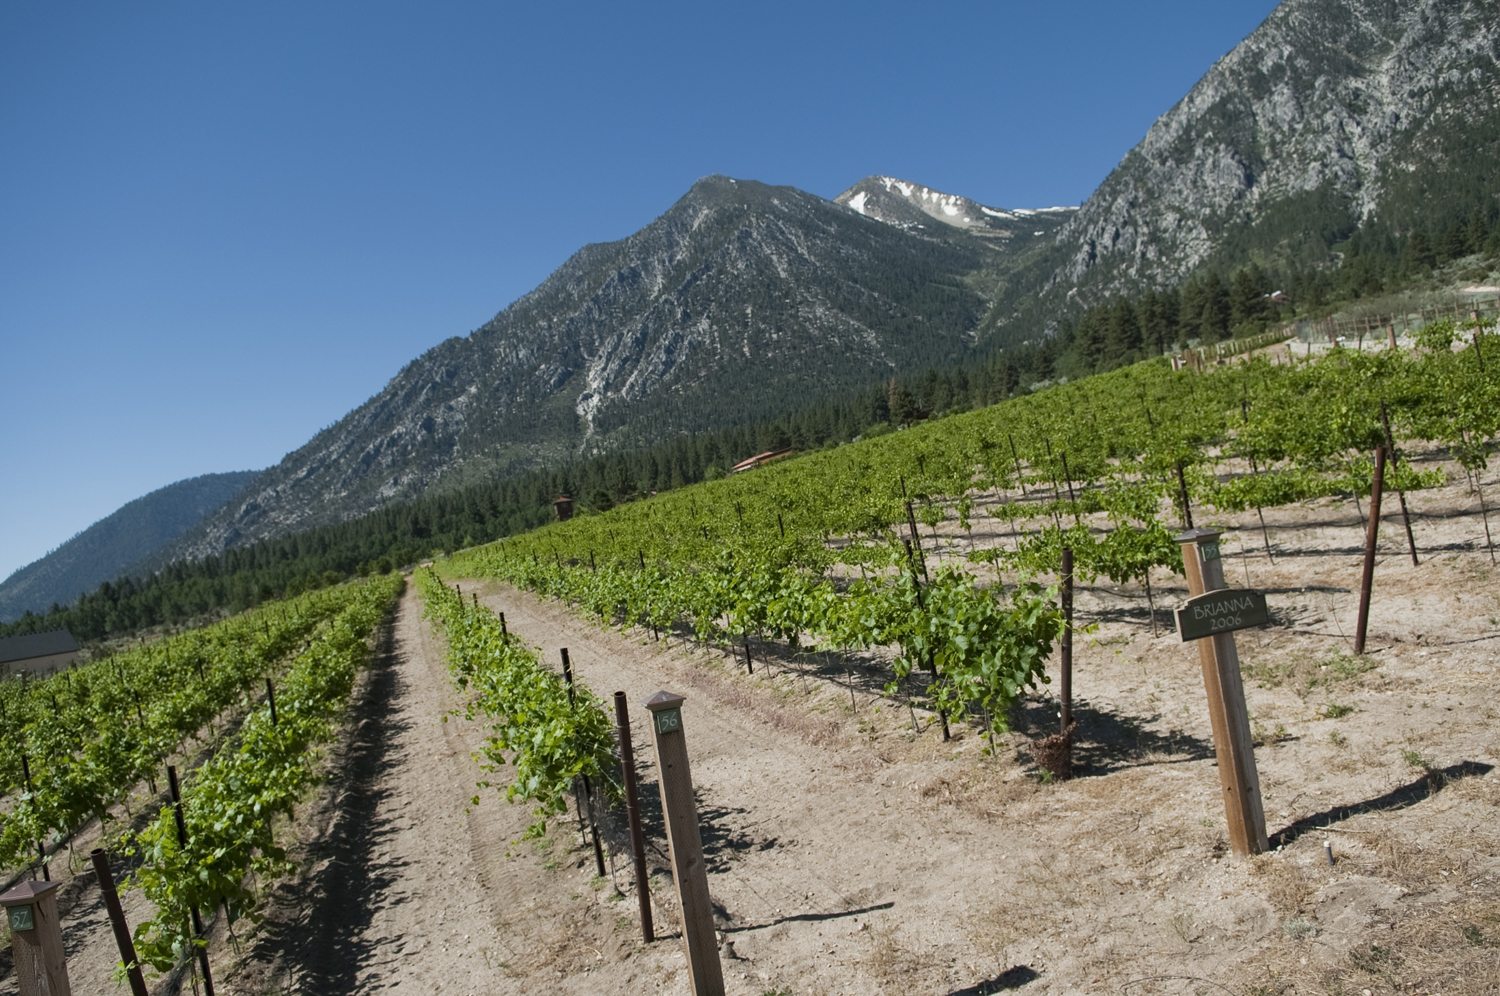 Coalition forms to change law to allow wineries across Nevada